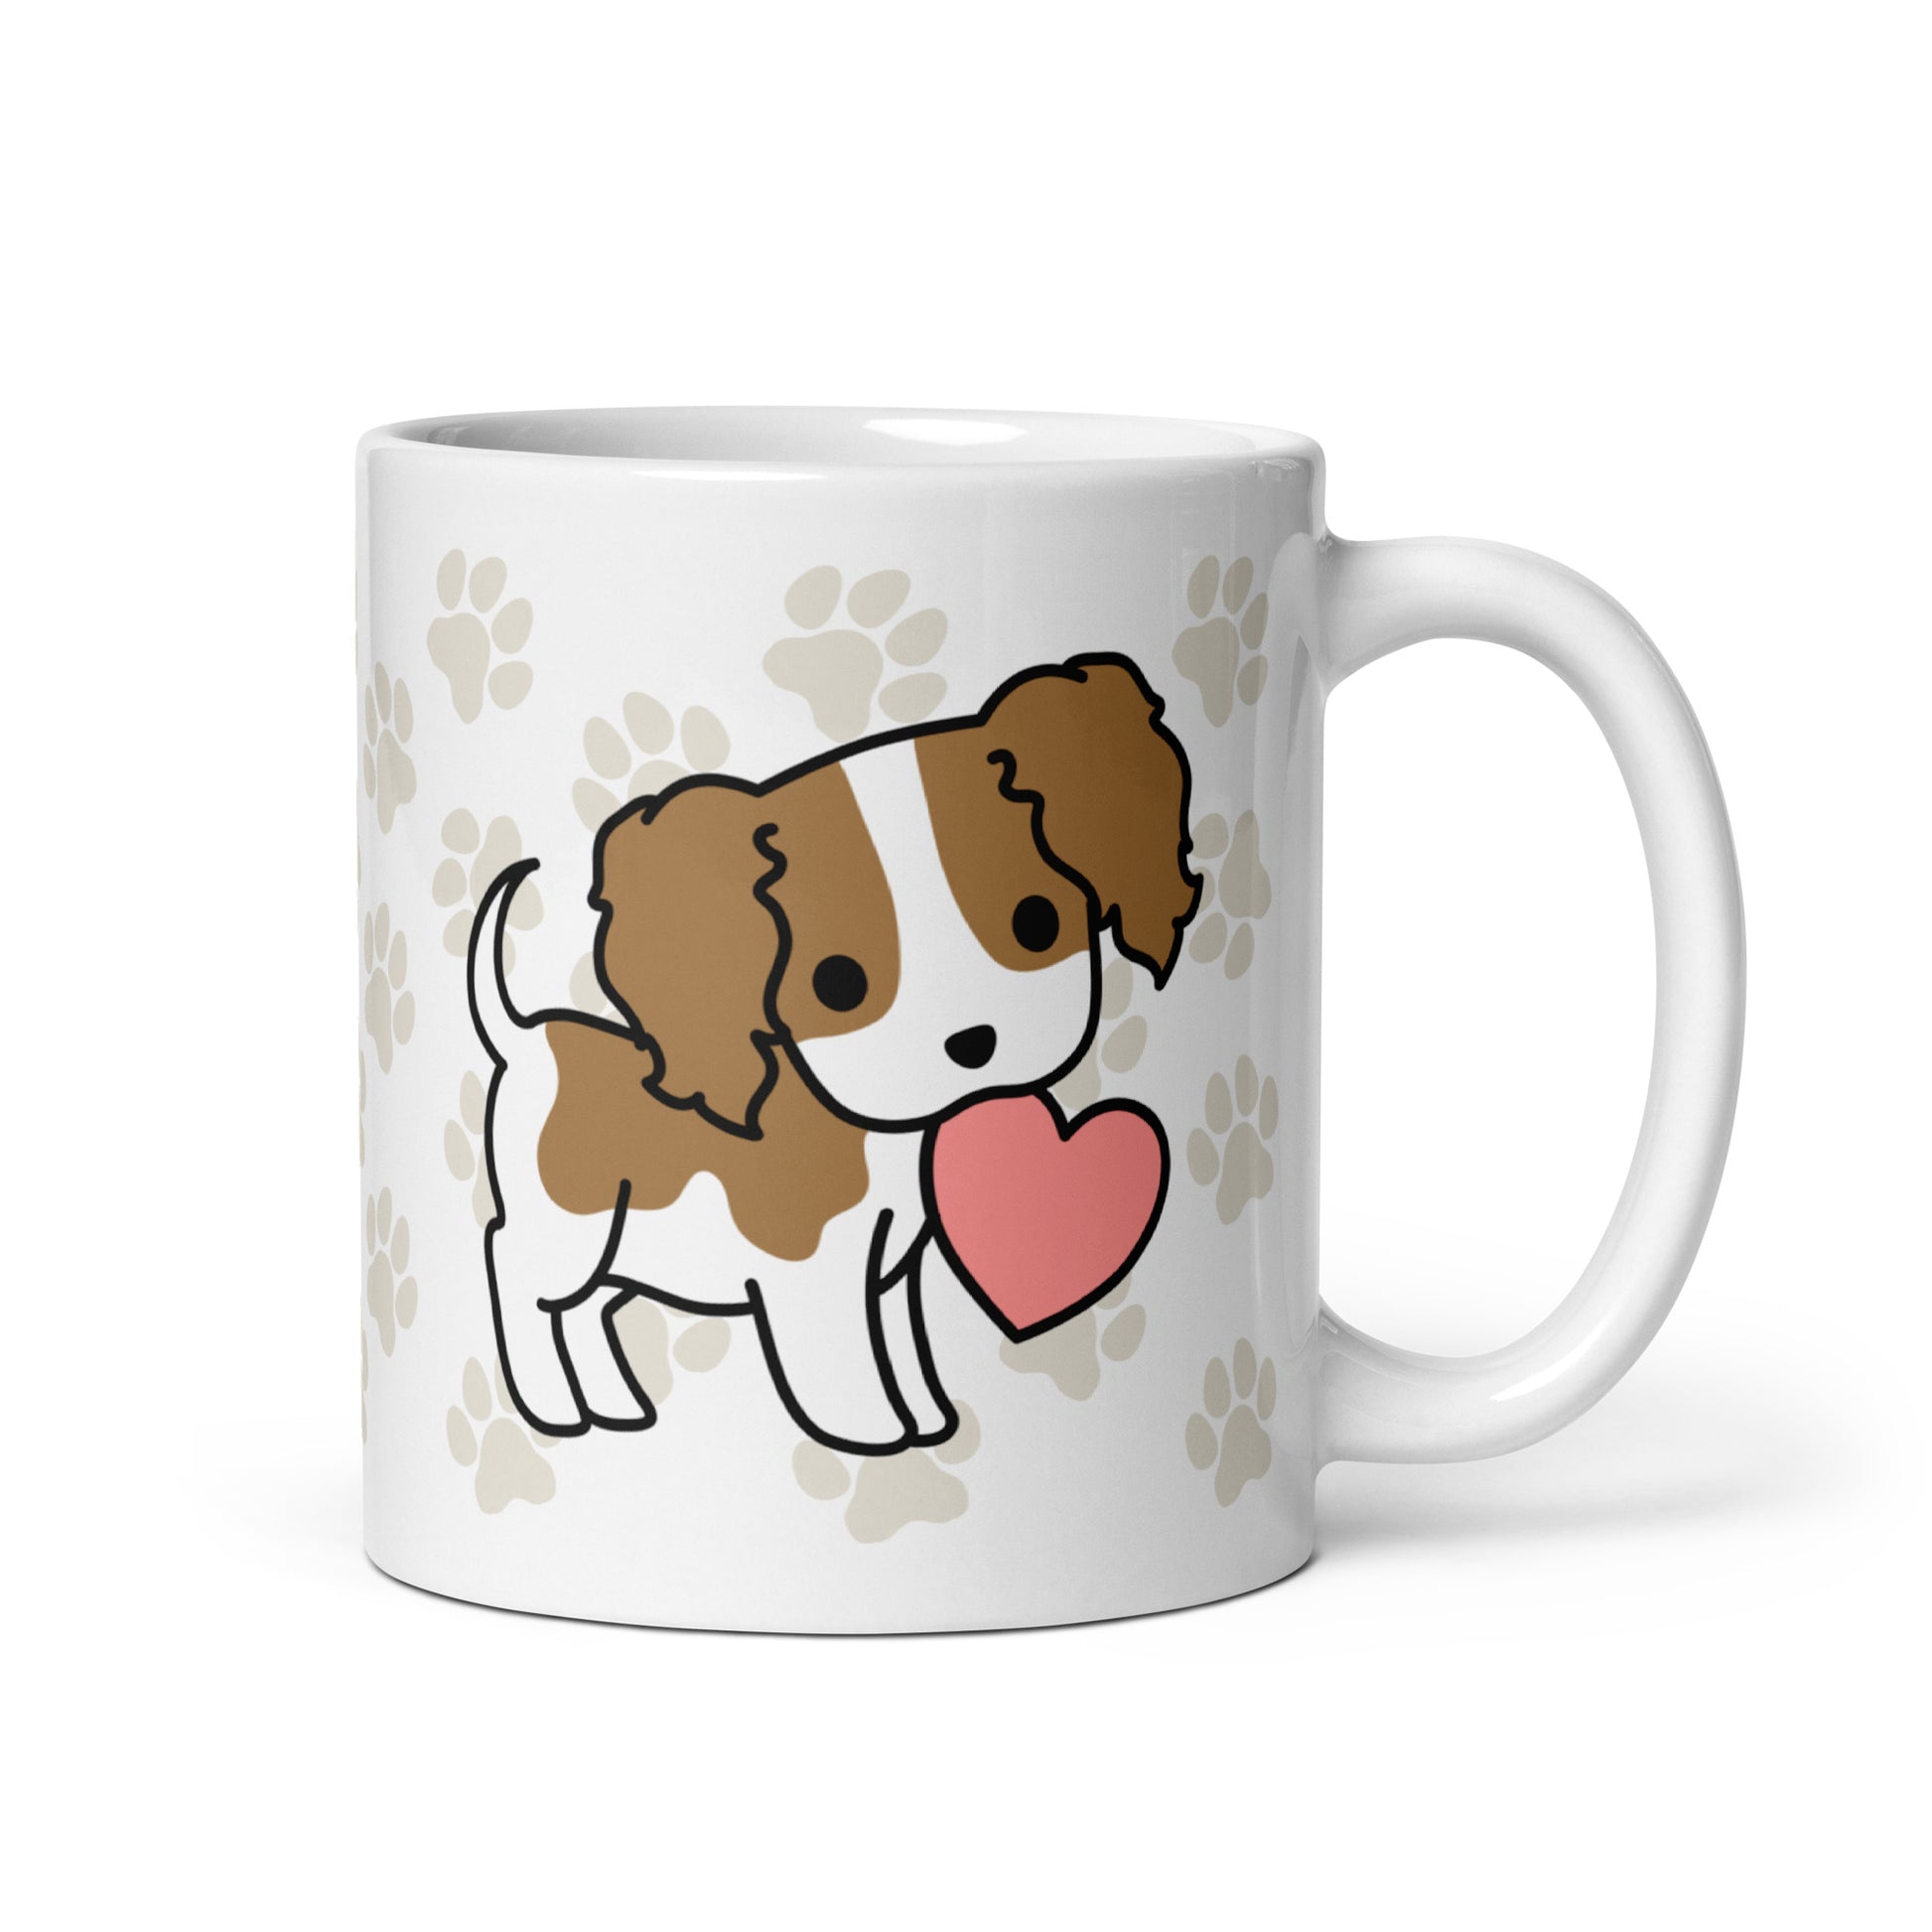 A white 11 ounce ceramic mug with a pattern of light brown pawprints all over. The mug also features a stylized illustration of a Cavalier King Charles Spaniel holding a heart in its mouth.